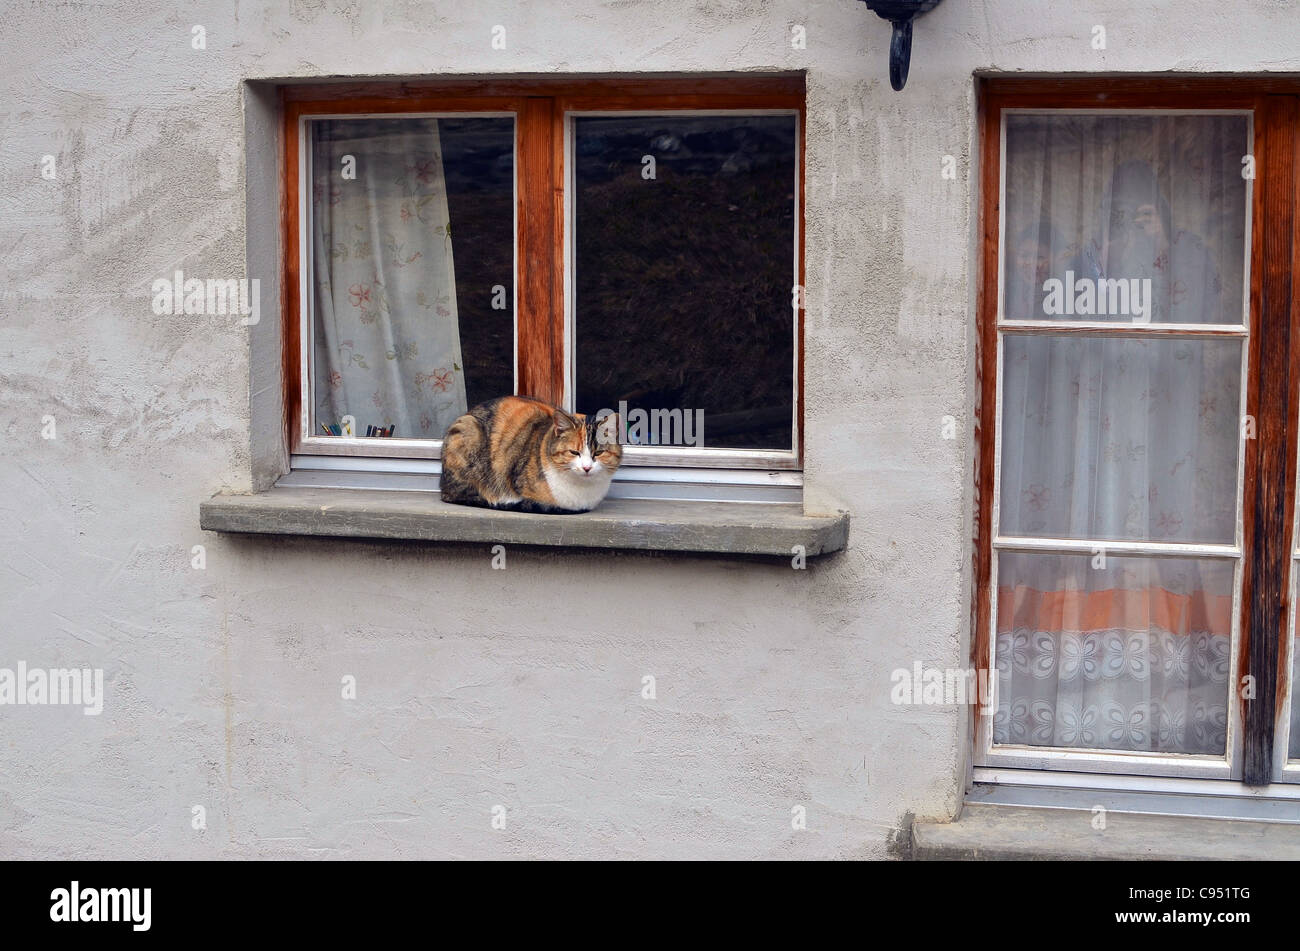 A cat napping on the window sill of a country chalet in Wengen, Switzerland. Stock Photo